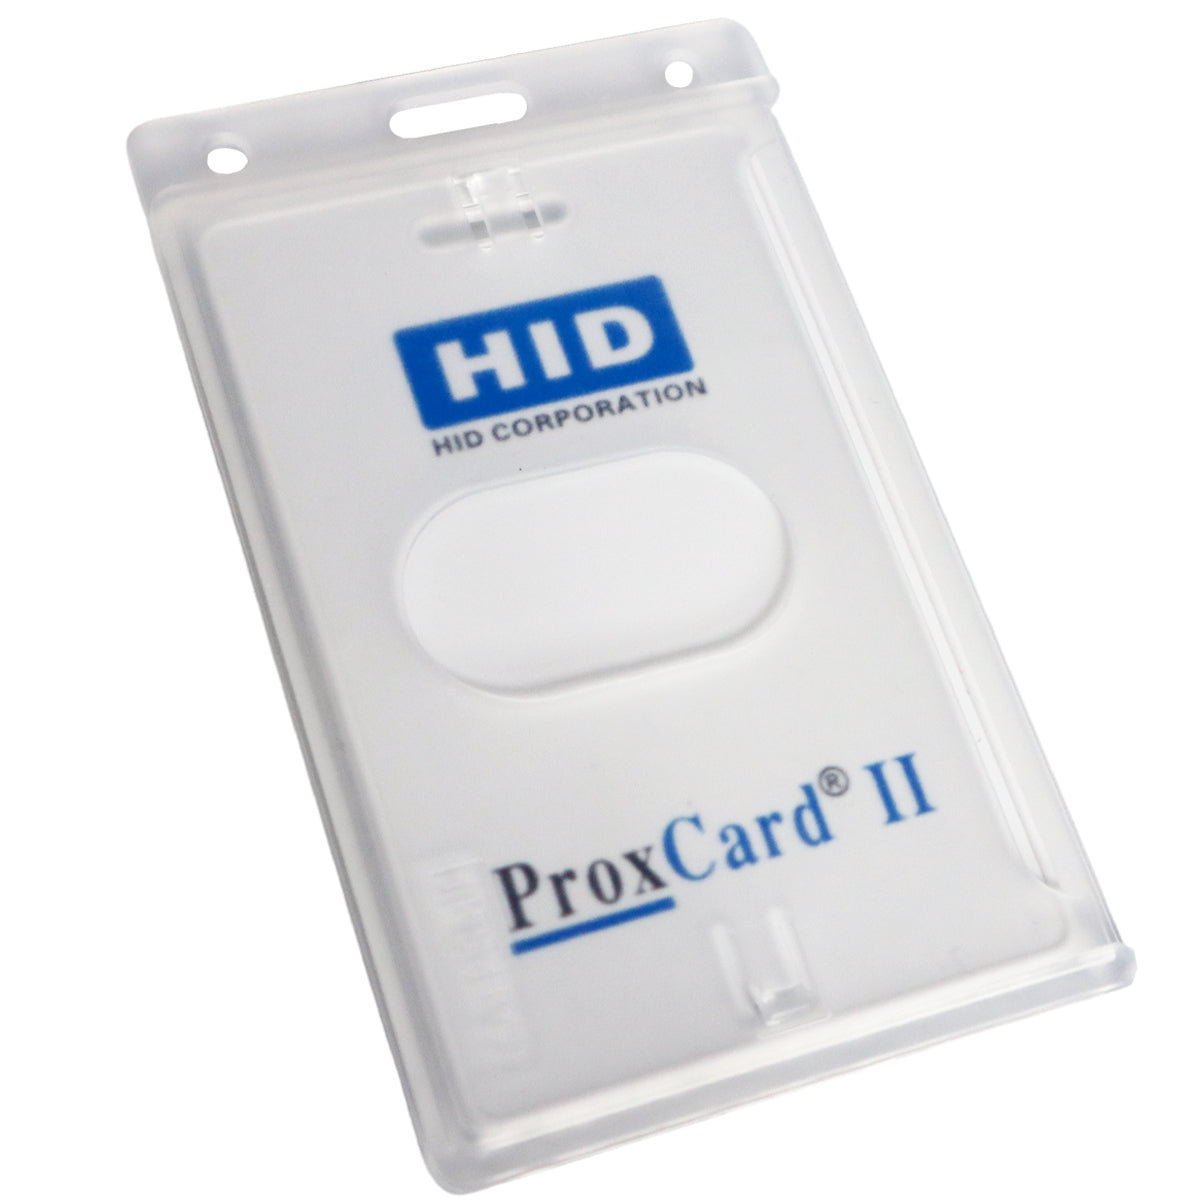 Vertical 70 - 90 Mil ProxCard II / Thick HID Proximity Card Holder (SPID-PROX-V)